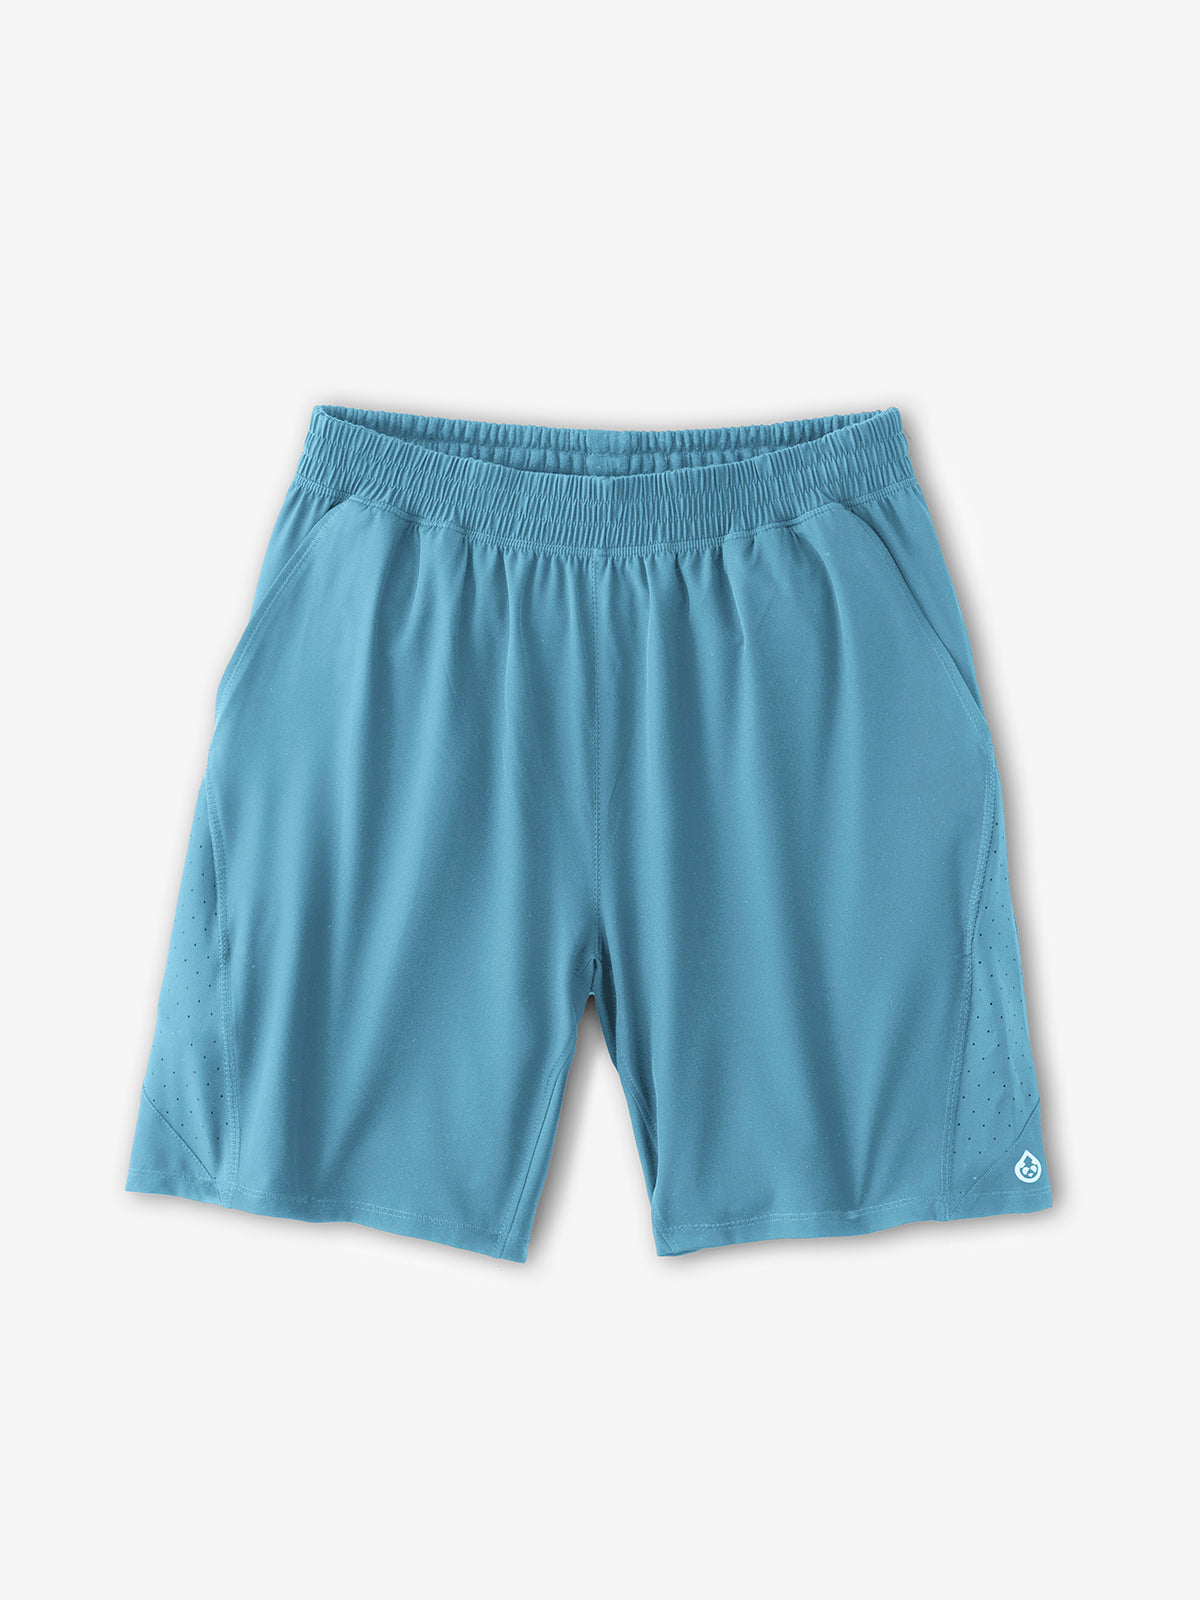 Weightless 7in Unlined Short tasc performance (LakeBlue)